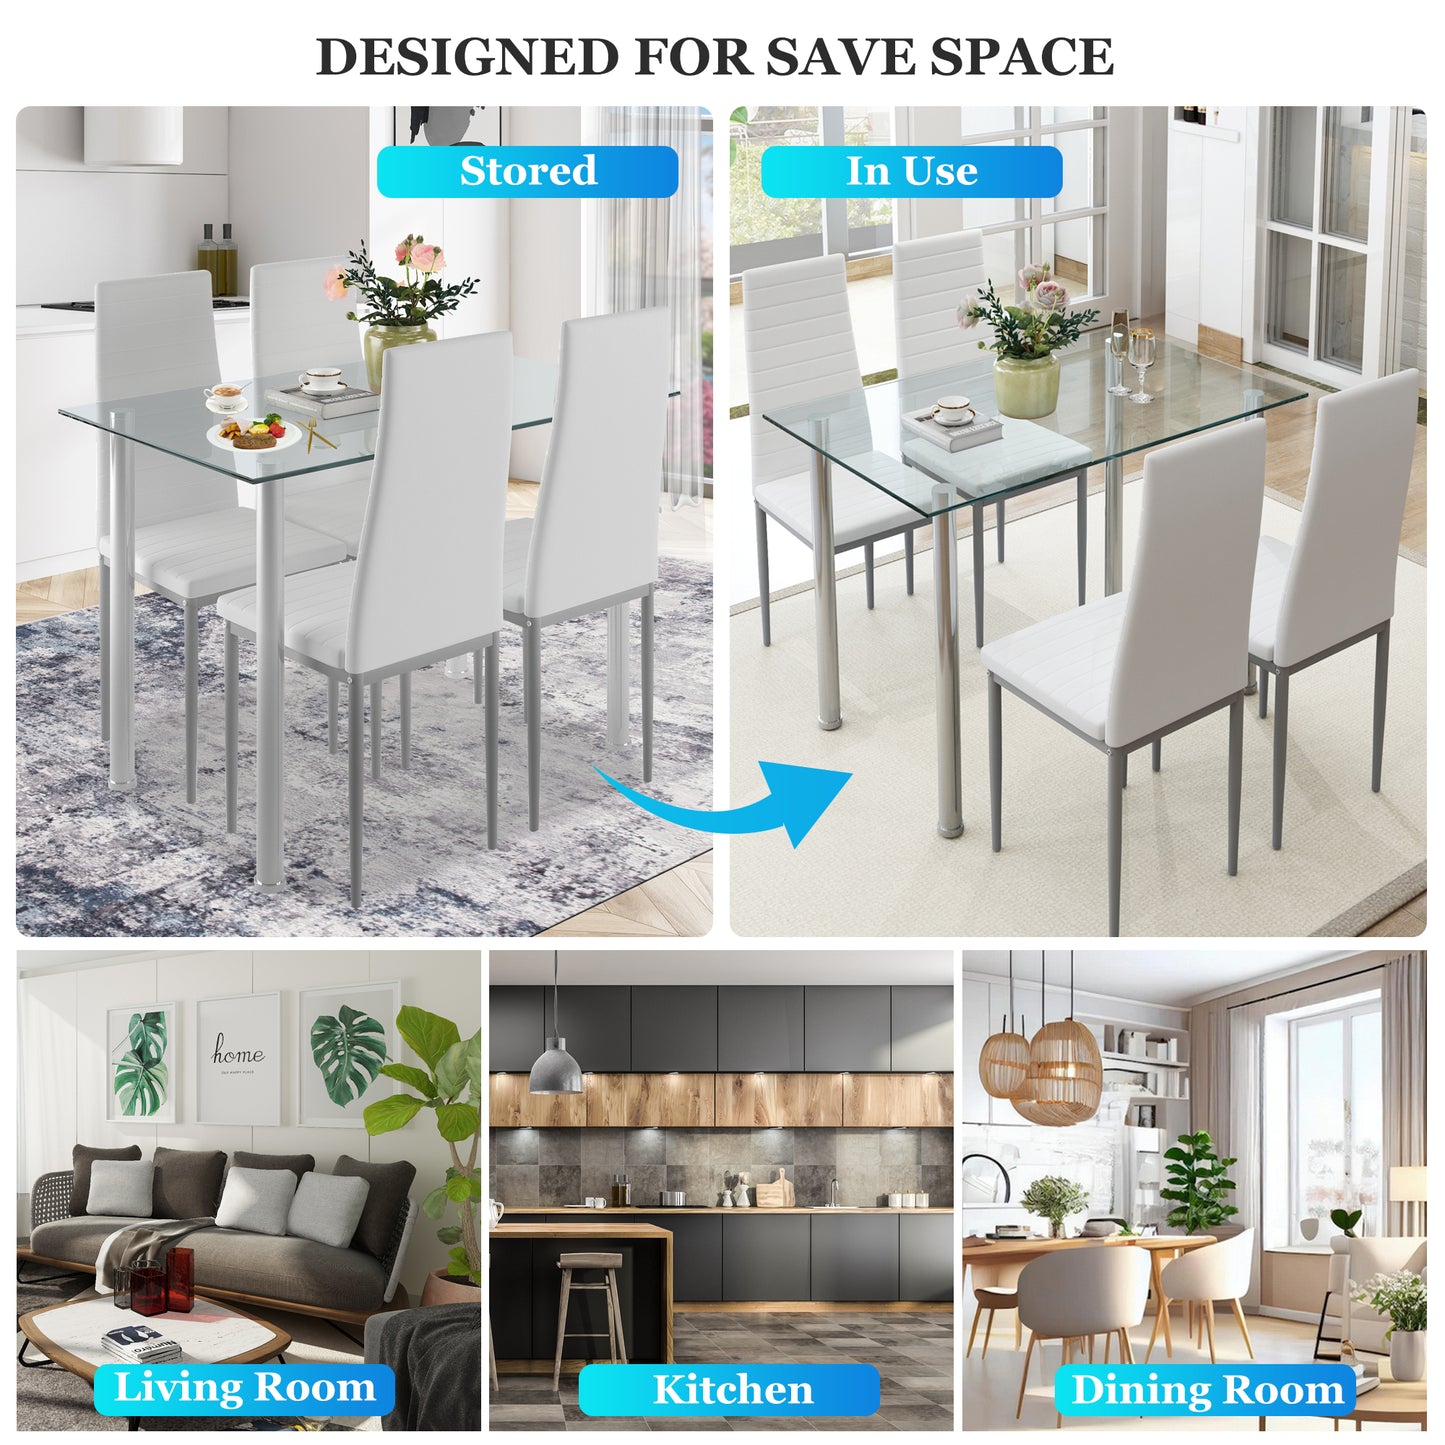 5 Piece Glass Dining Table Set, HSUNNS Rectangle Tempered Glass Dining Set with 4 High Back Chairs, Kitchen Table Set for 4, Modern Dining Room Furniture, White